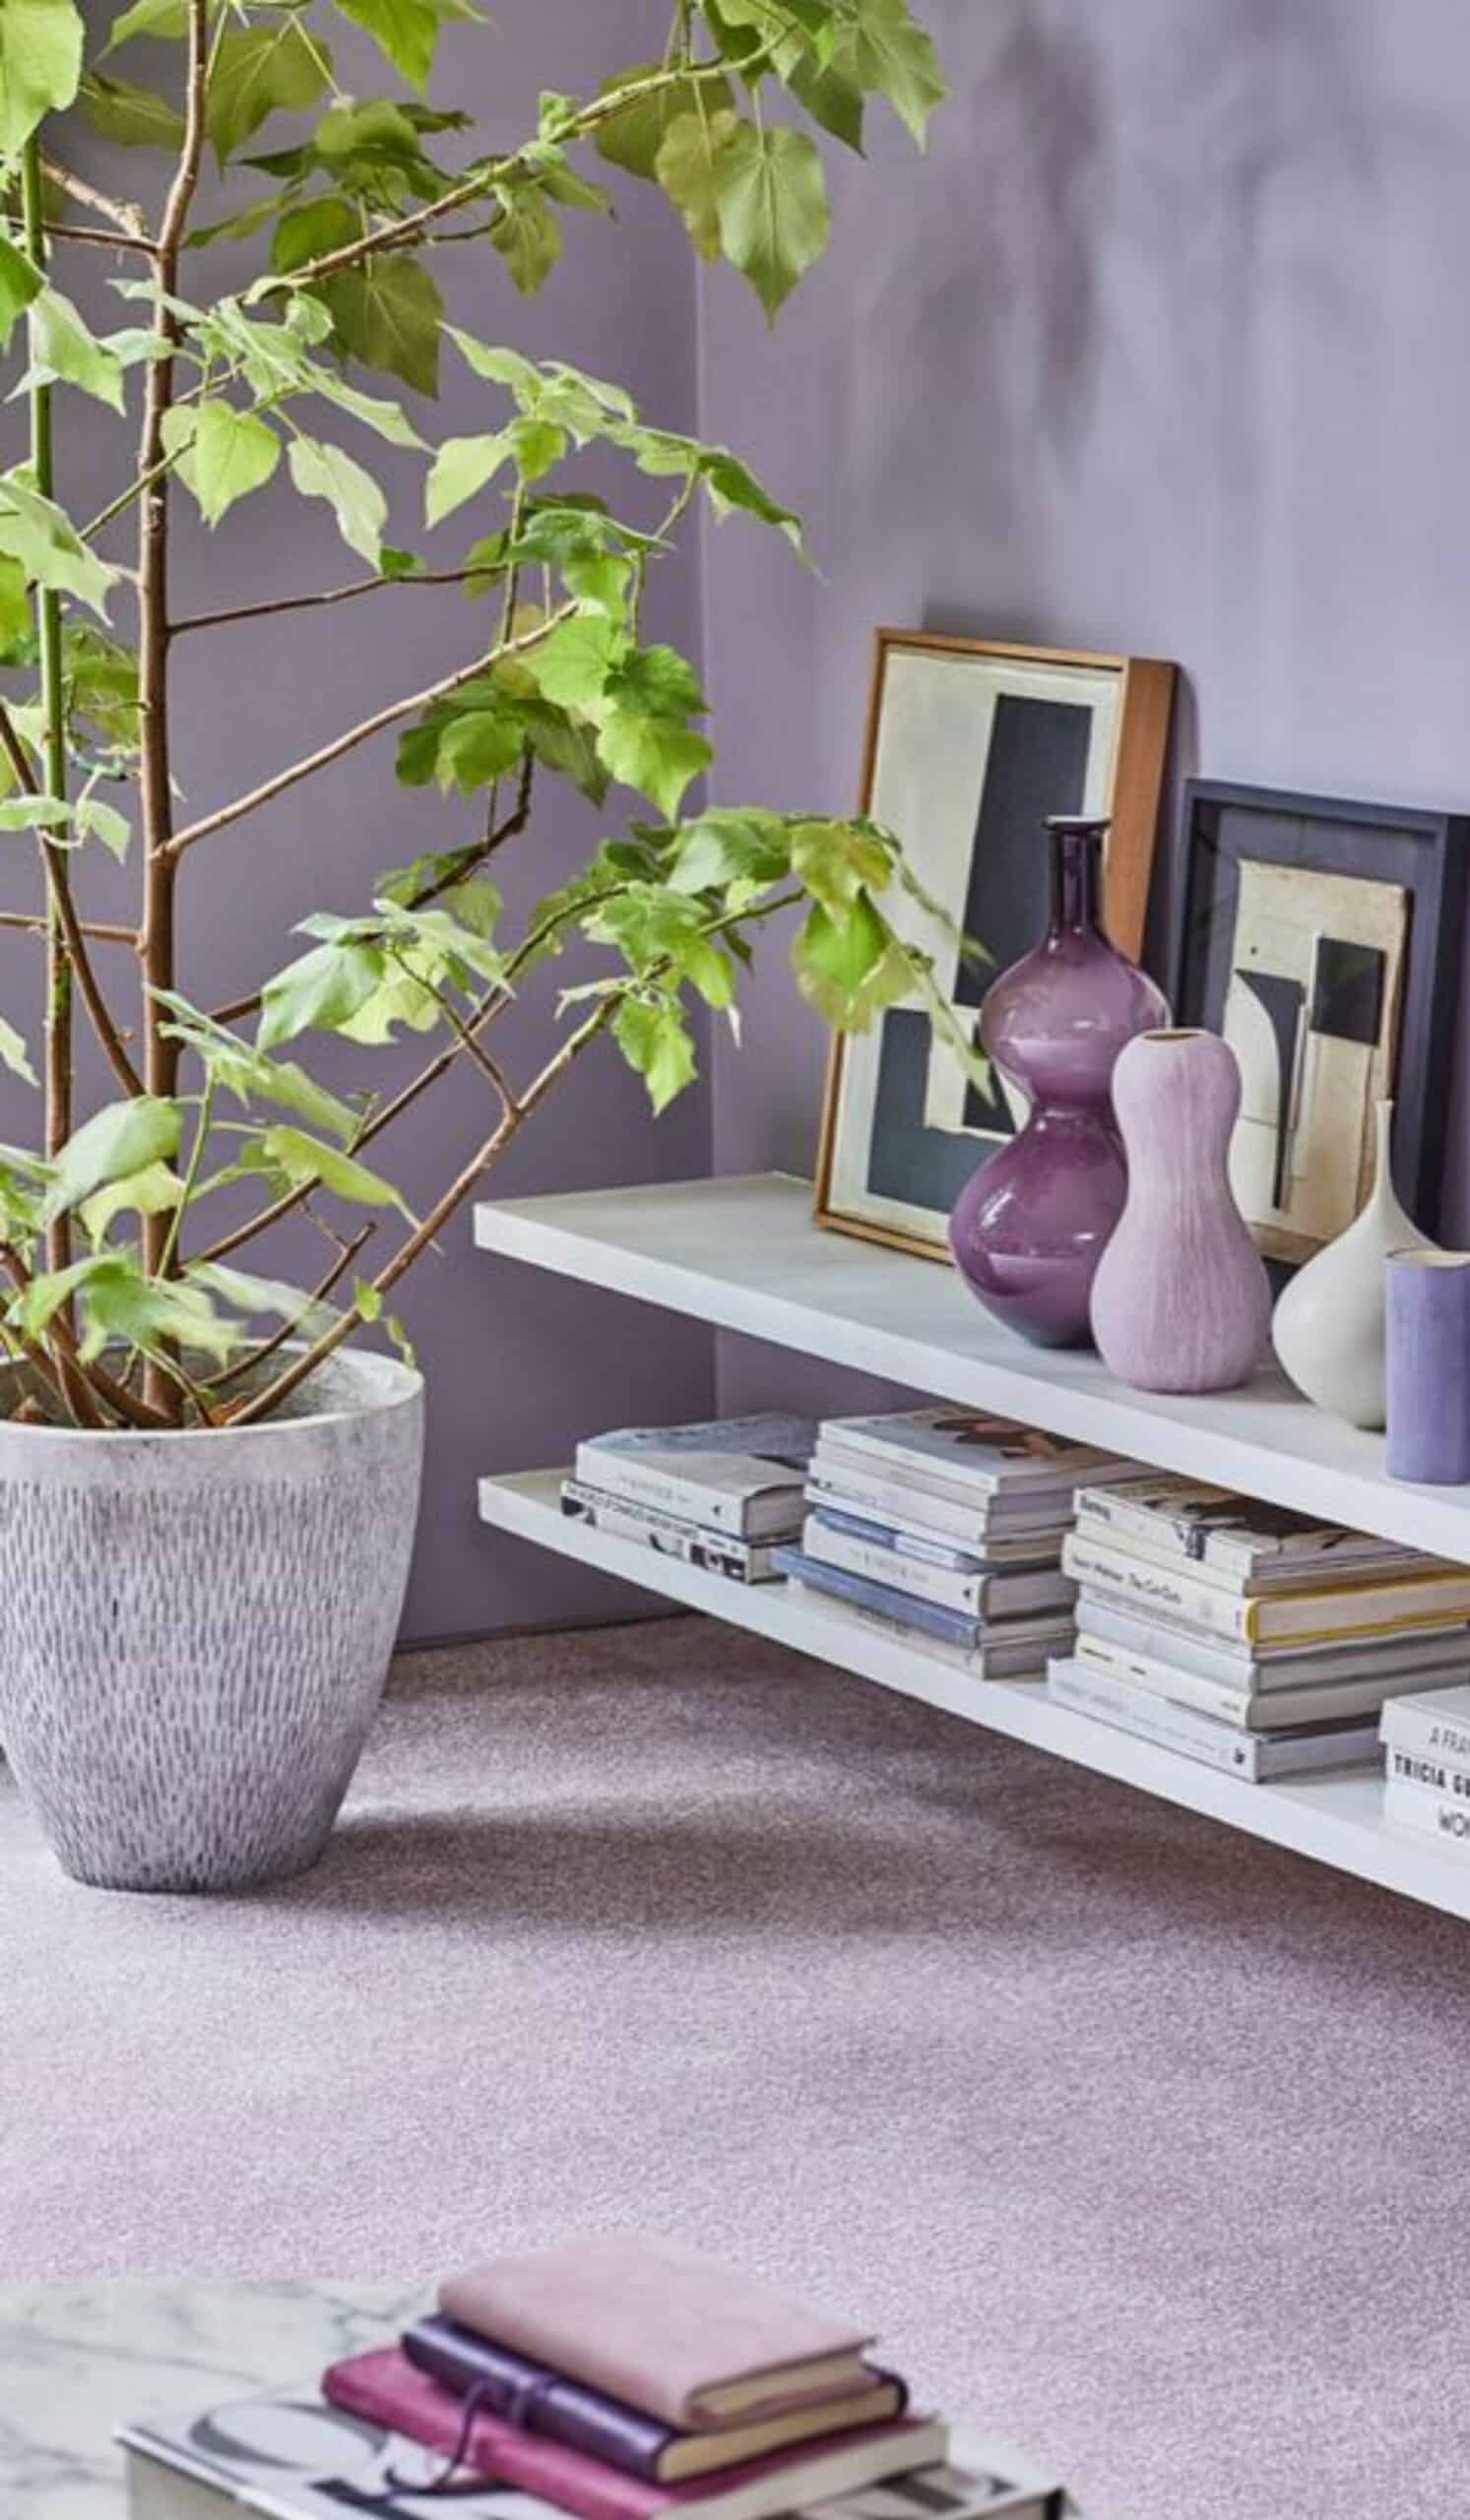 Compliment the Lilac with Green Plants